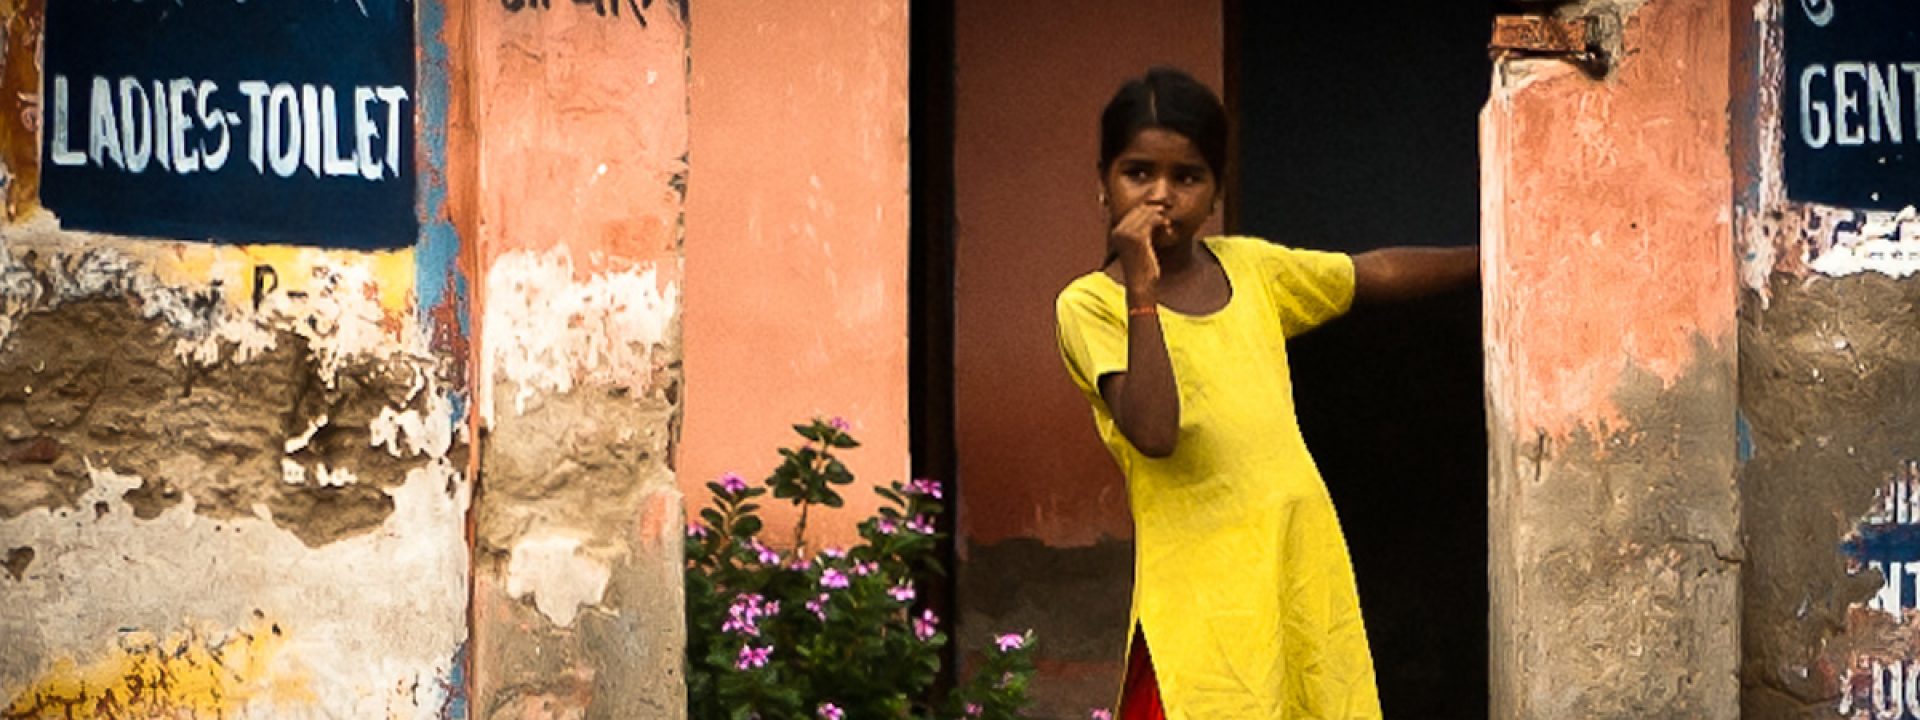 Not a school, not a home, not a woman without proper sanitation